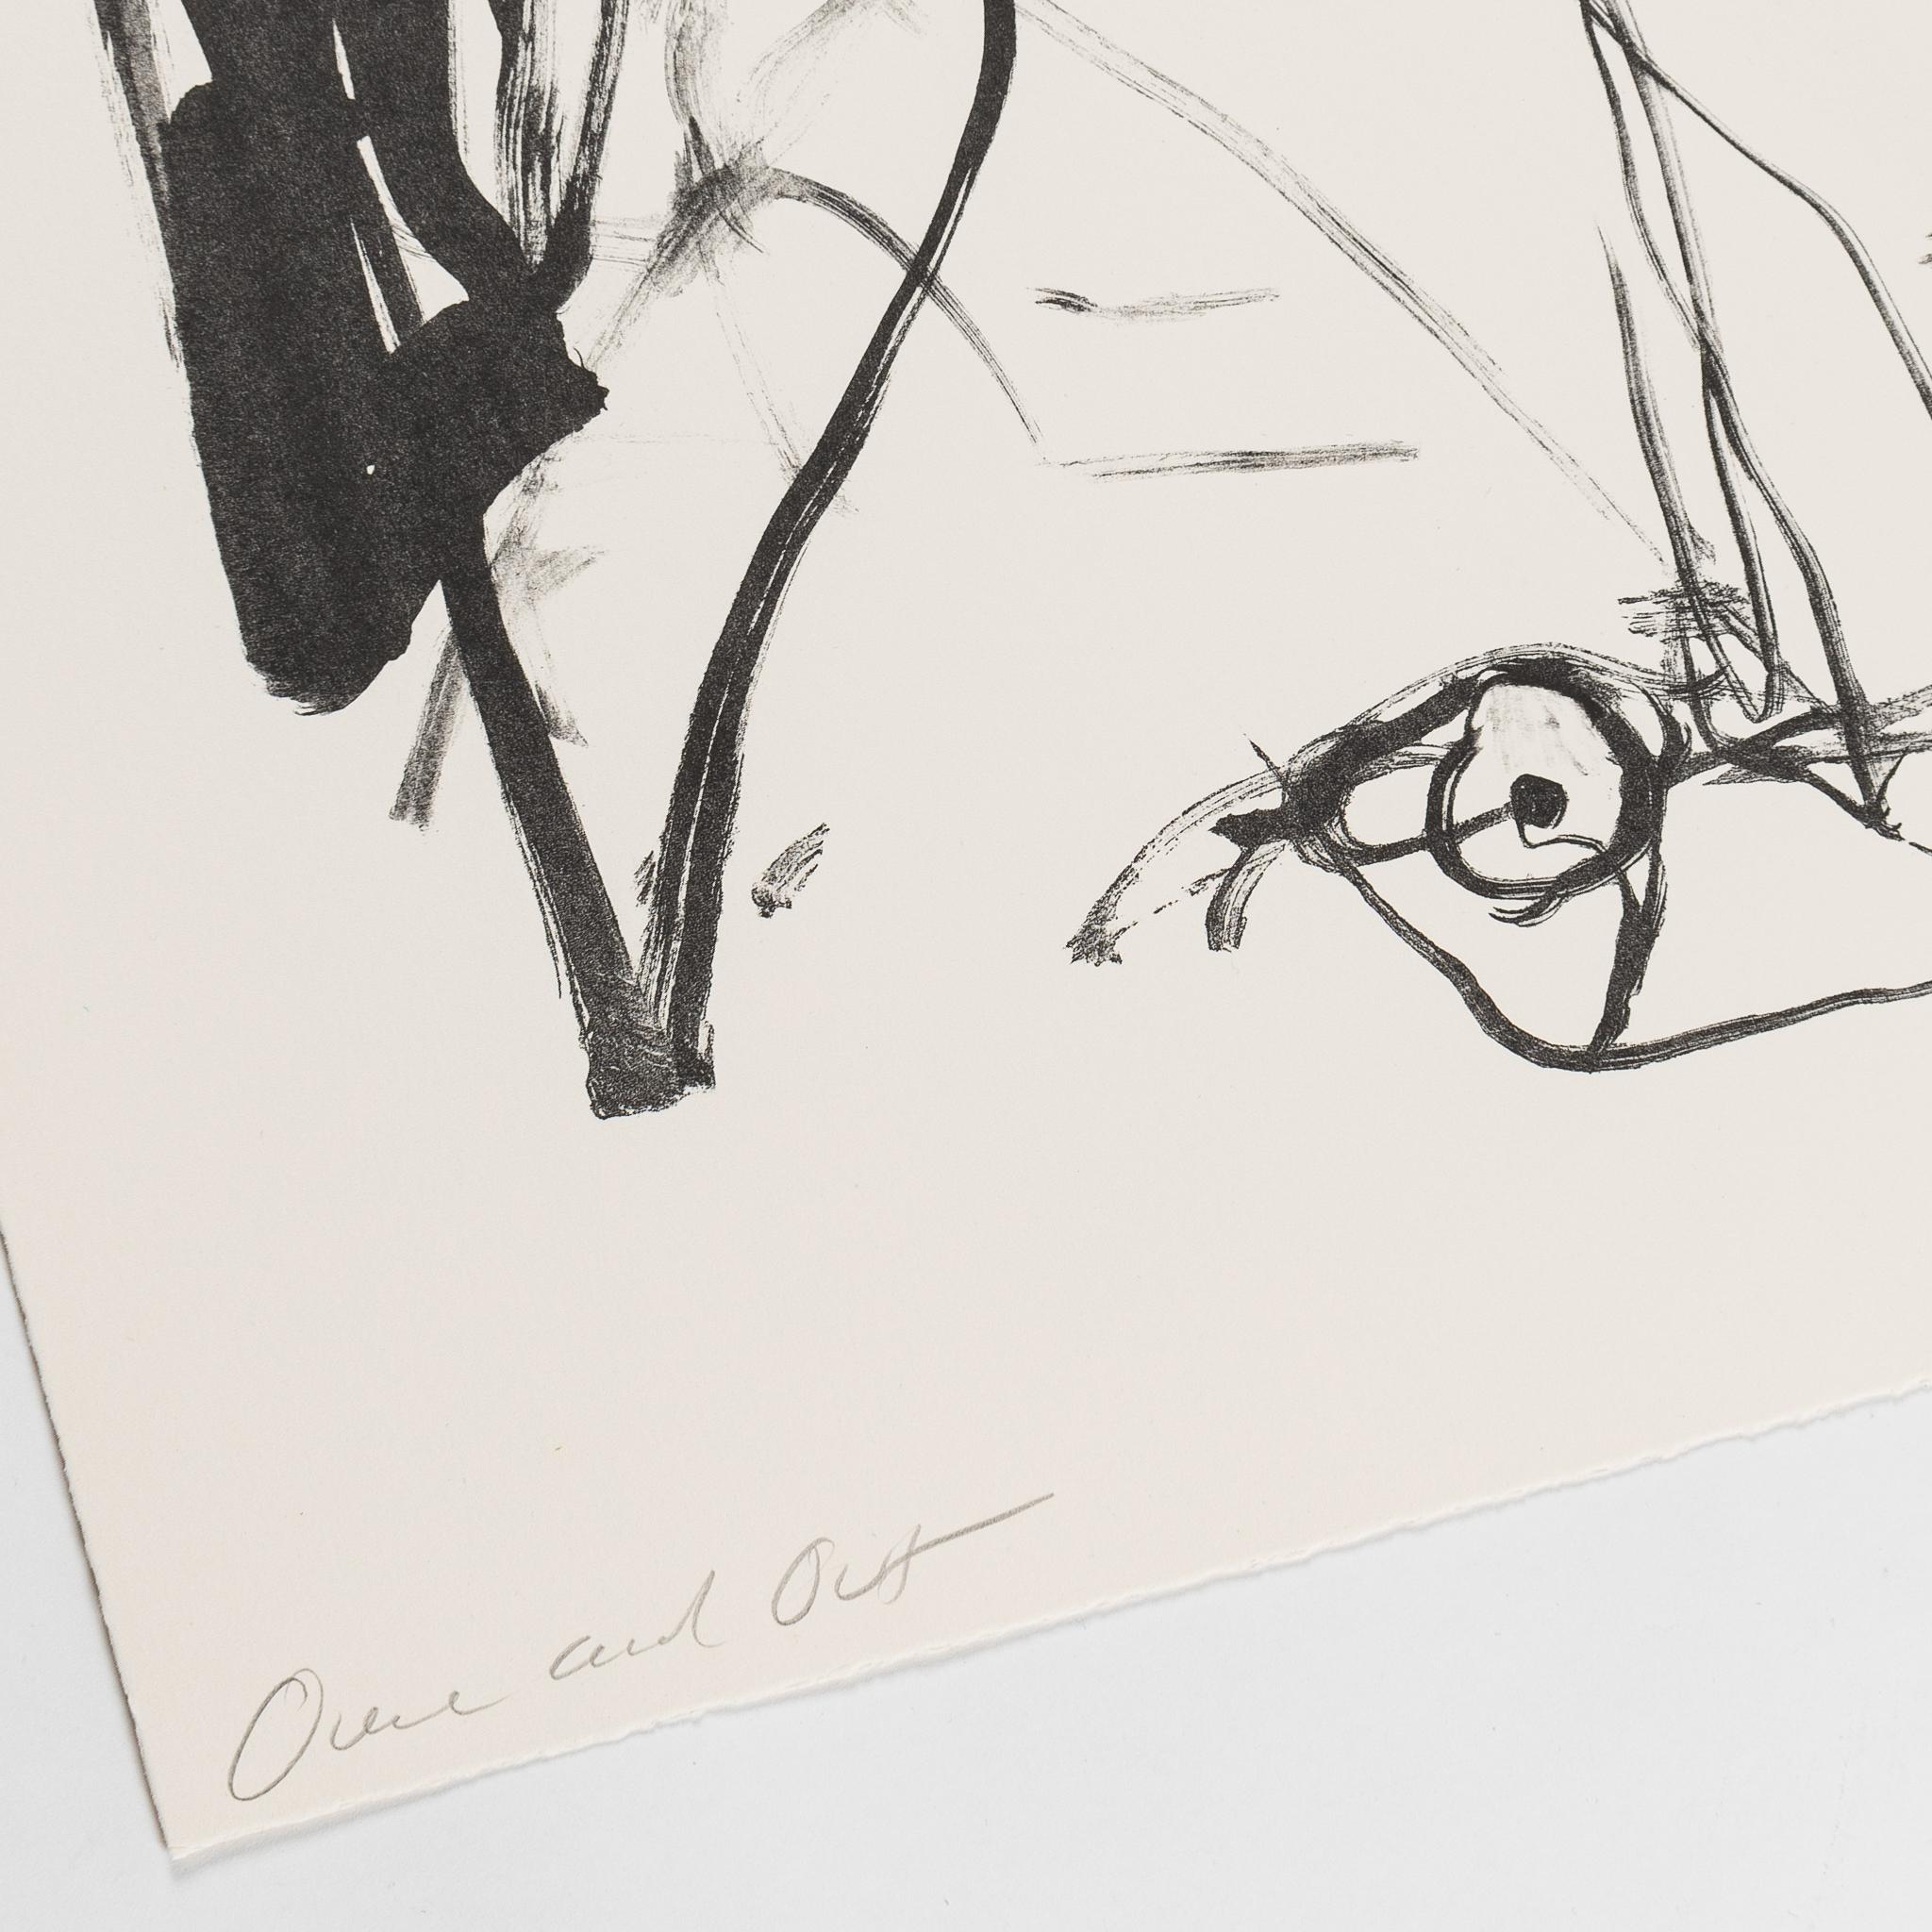 Over and Out - Contemporary Print by Tracey Emin